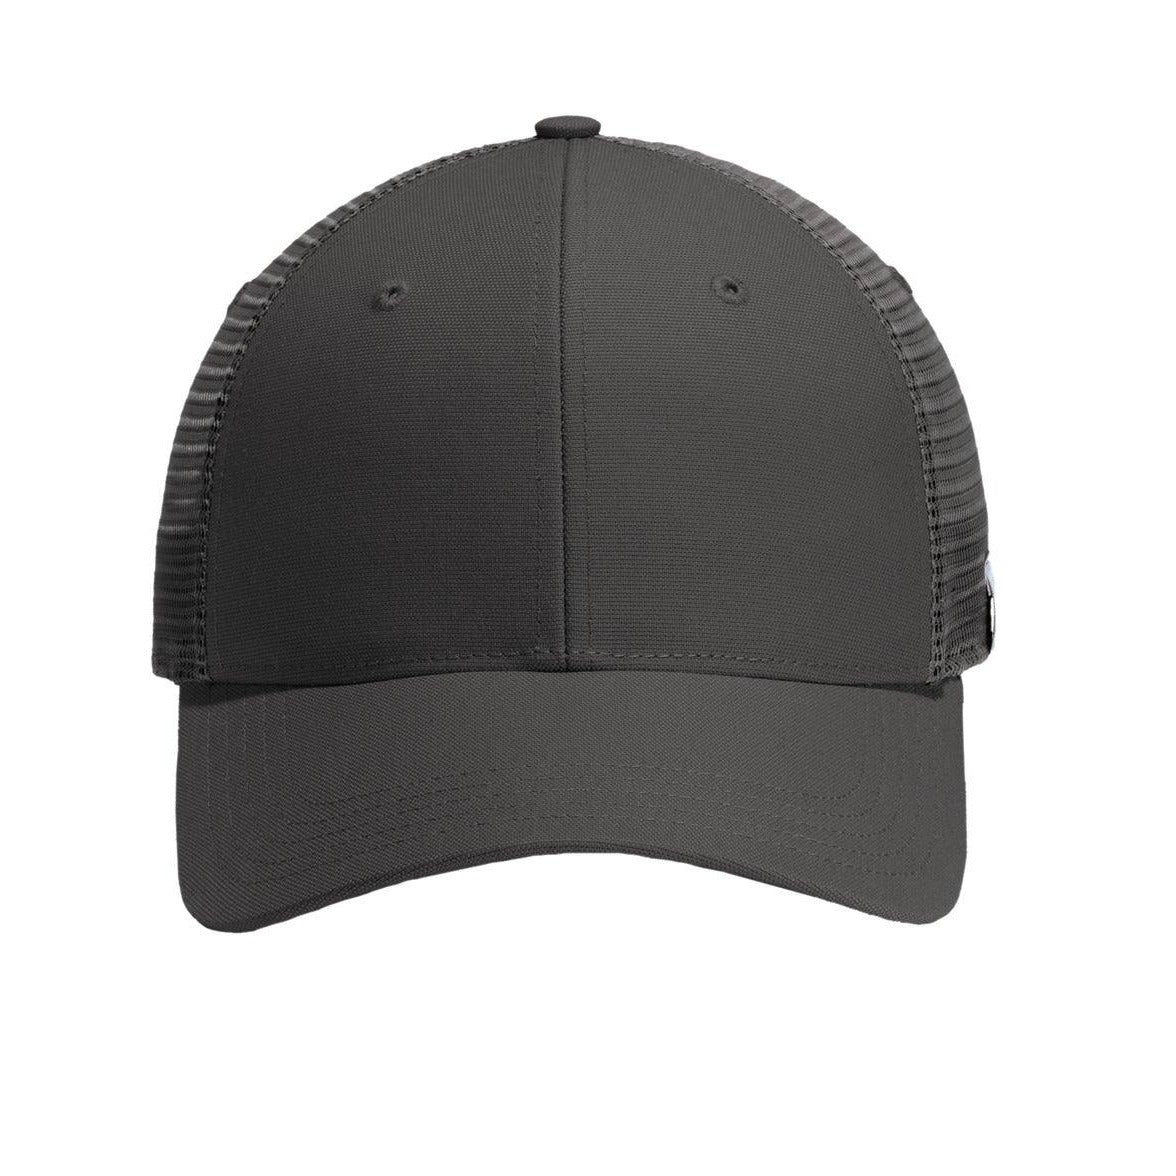 Custom Leather Patch Hats Wholesale and No Minimum, Leather Patch